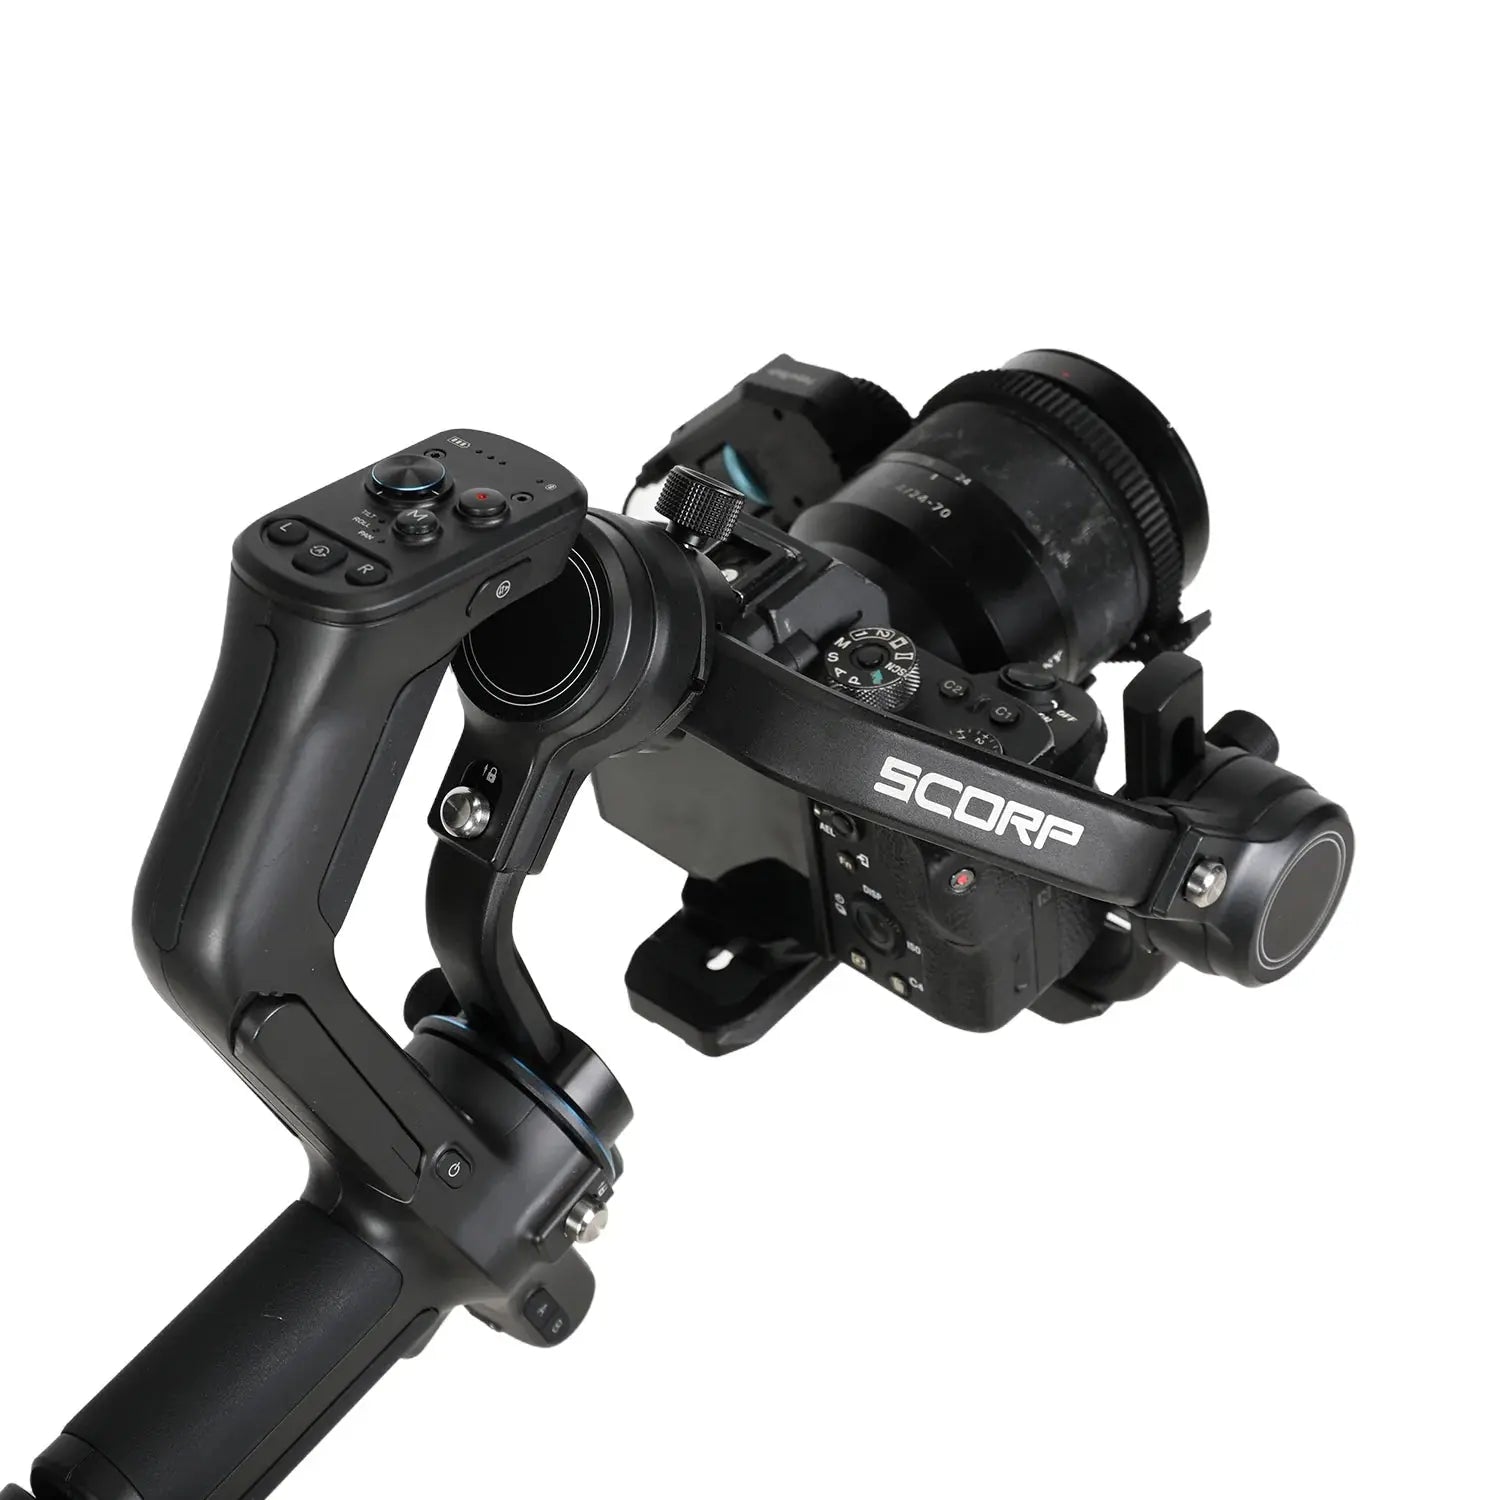 Feiyu Scorp-C 3-Axis Handheld Gimbal Stabilizer with Button Control for DSLR and Mirrorless Cameras5